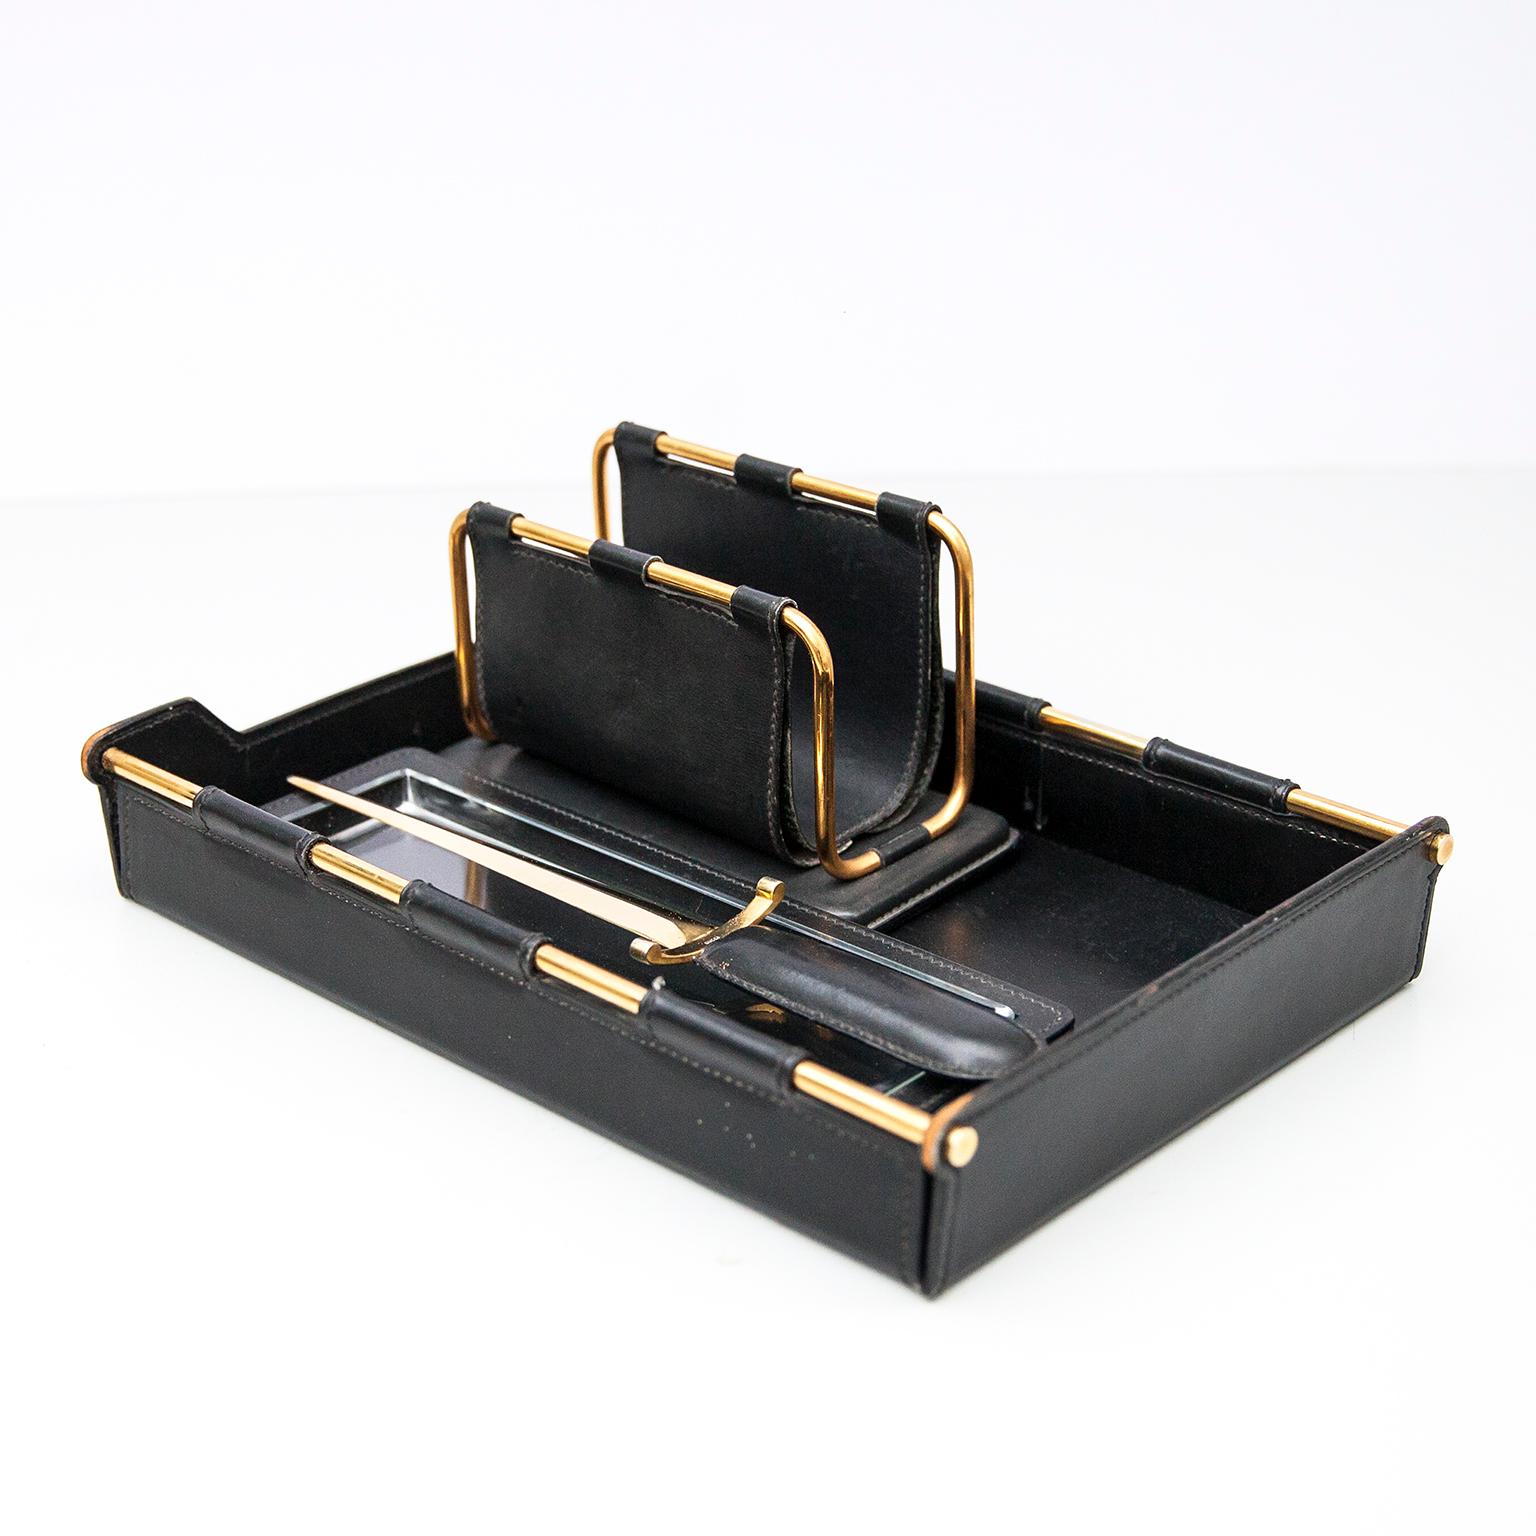 Stunning Gucci desk set made of black leather and brass. Four pieces include: massive desktop blotter or pad, huge letter opener, envelope holder and a leather pen holder with glass inlay. All pieces marked Gucci. Beautiful set. Very good vintage